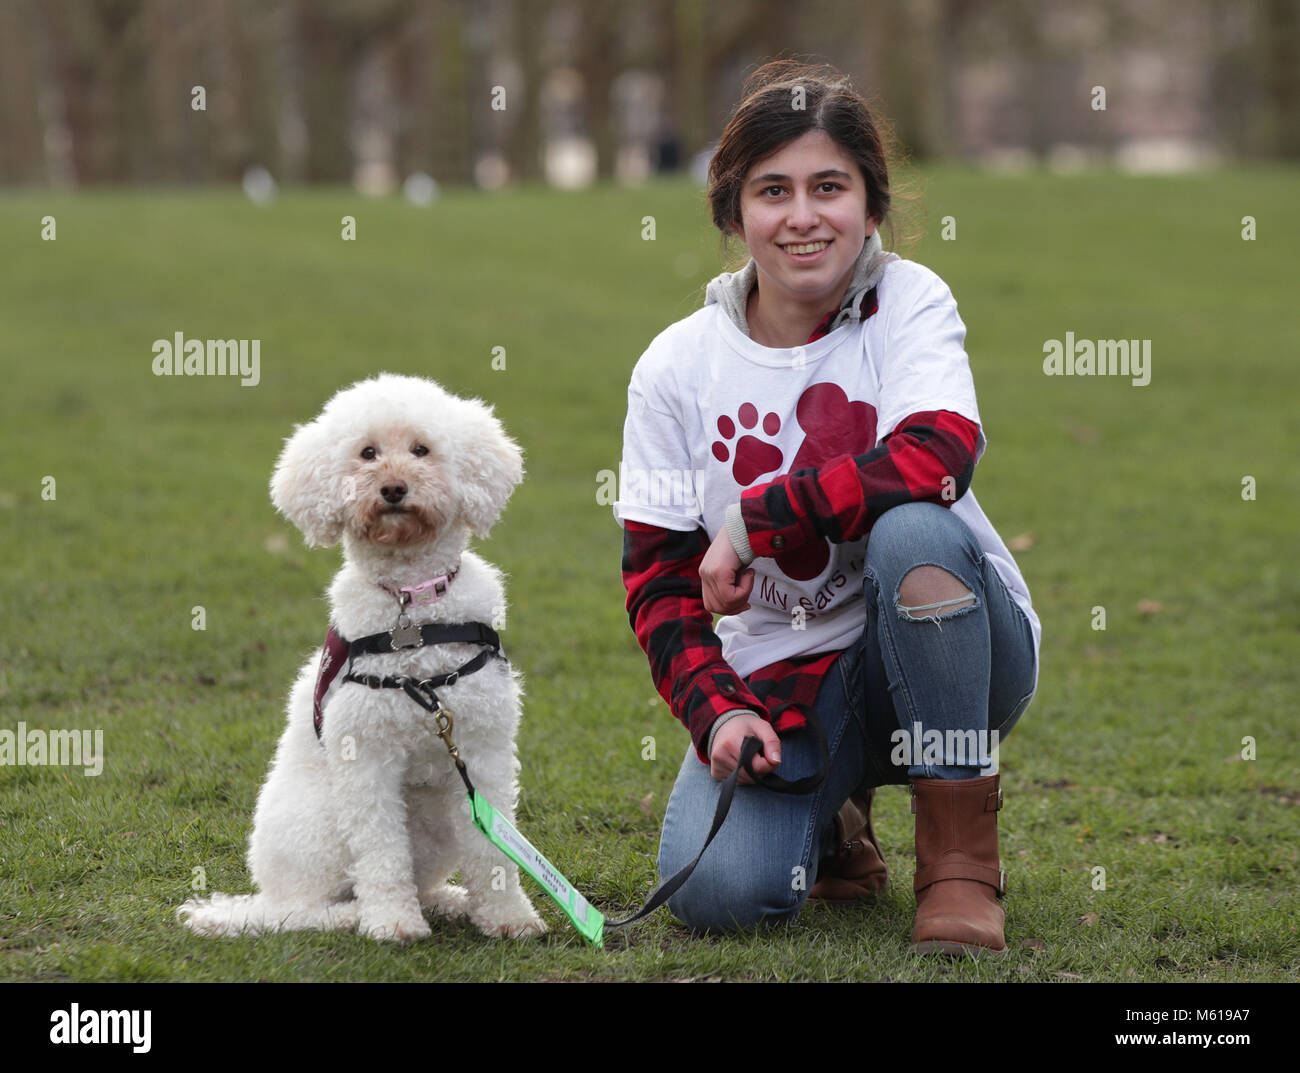 Sarah Mohammadi, 14, from Hayes in west London, with her Cocker Spaniel/Poodle cross Waffle, during a photocall by The Kennel Club in Green Park, London, to announce the finalists for the Crufts dog hero competition, Friends for Life 2018. Stock Photo